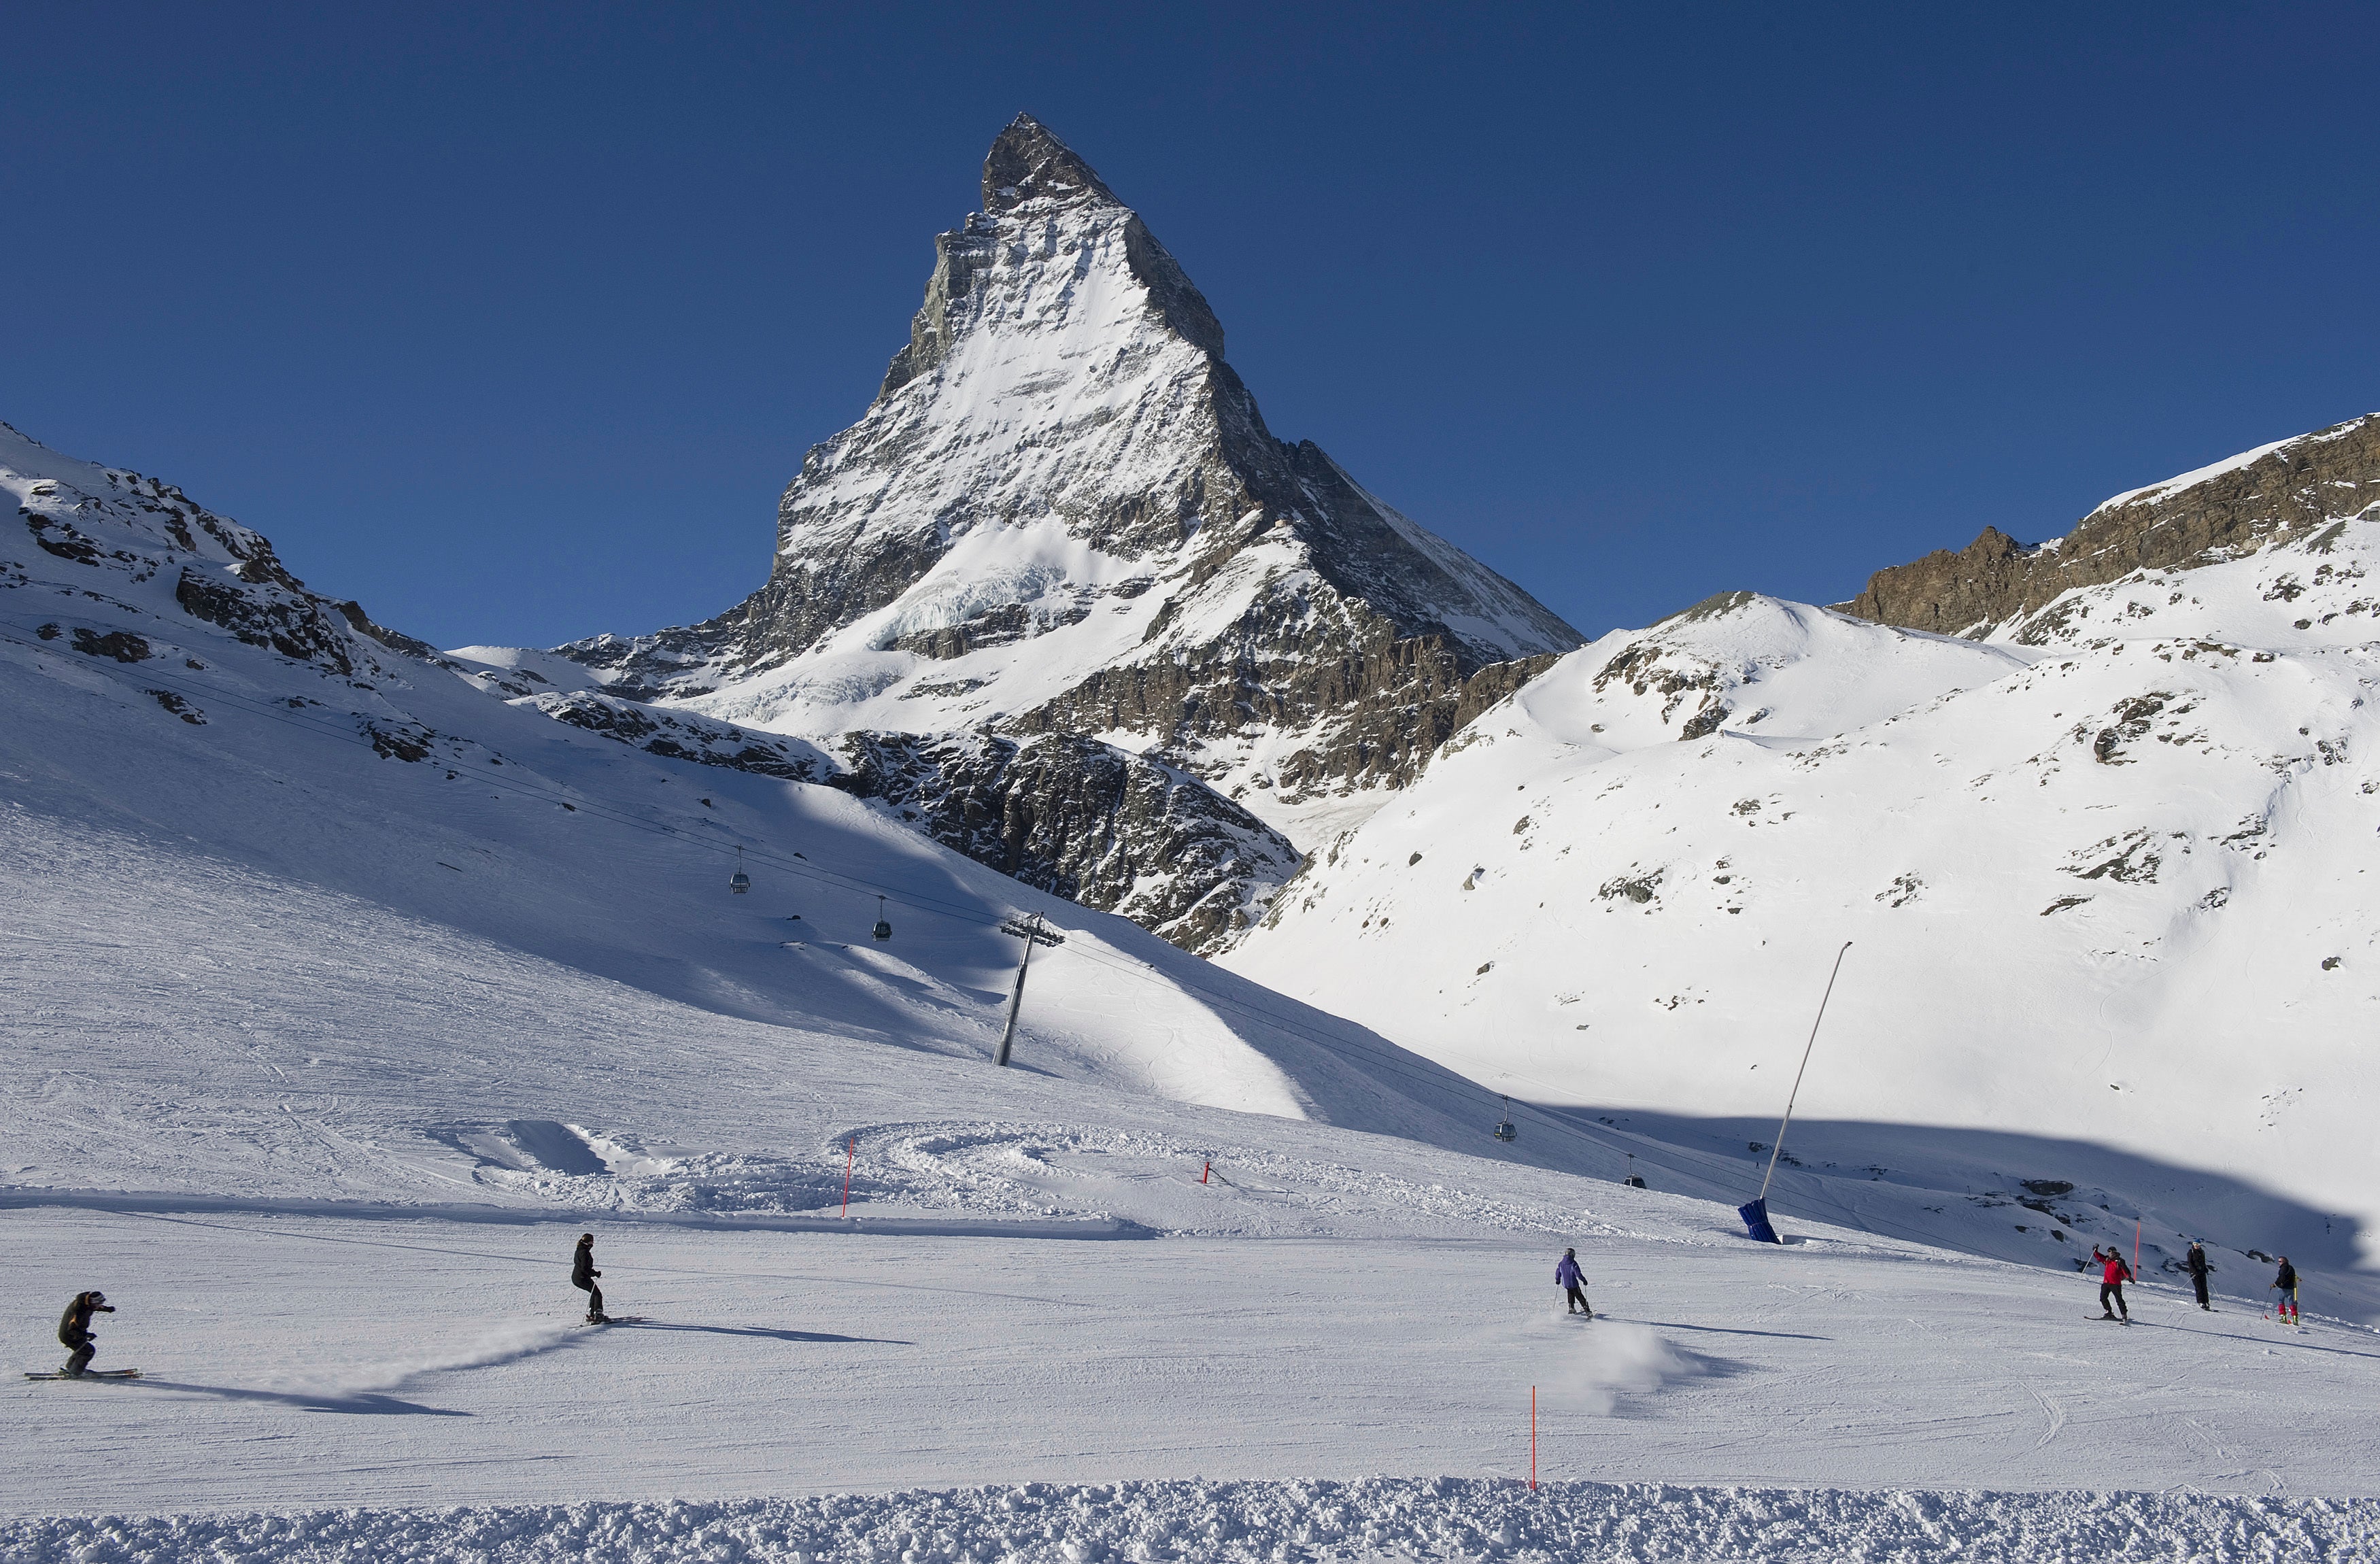 Skiers ride down the slopes at Riffelberg with Mount Matterhorn in the background. The area was hit by a deadly avalanche this year